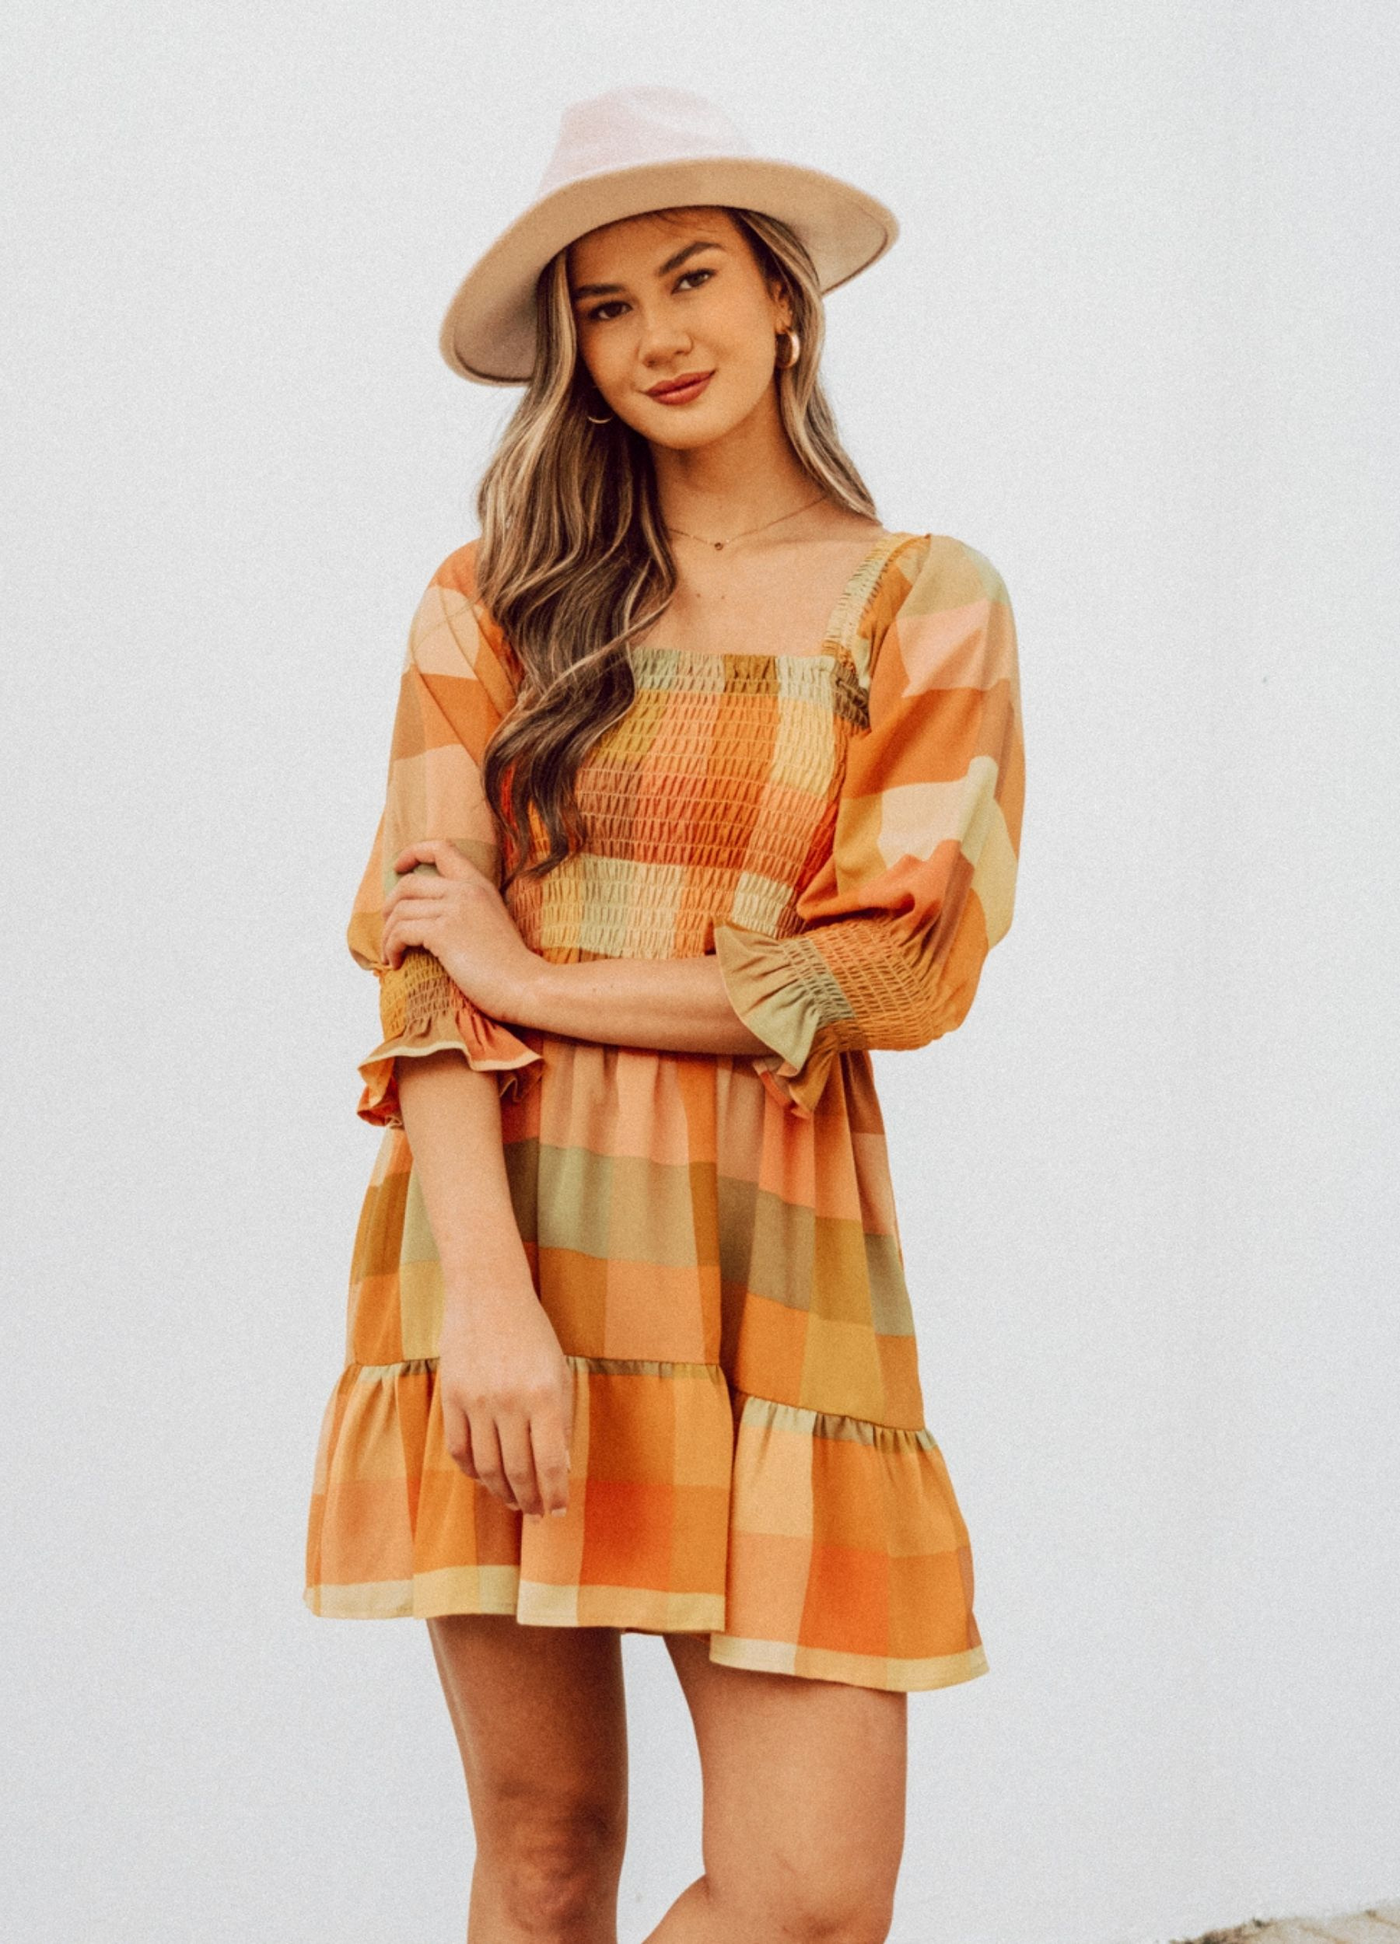 Woman wearing check mini dress in orange and khaki colourway with hat